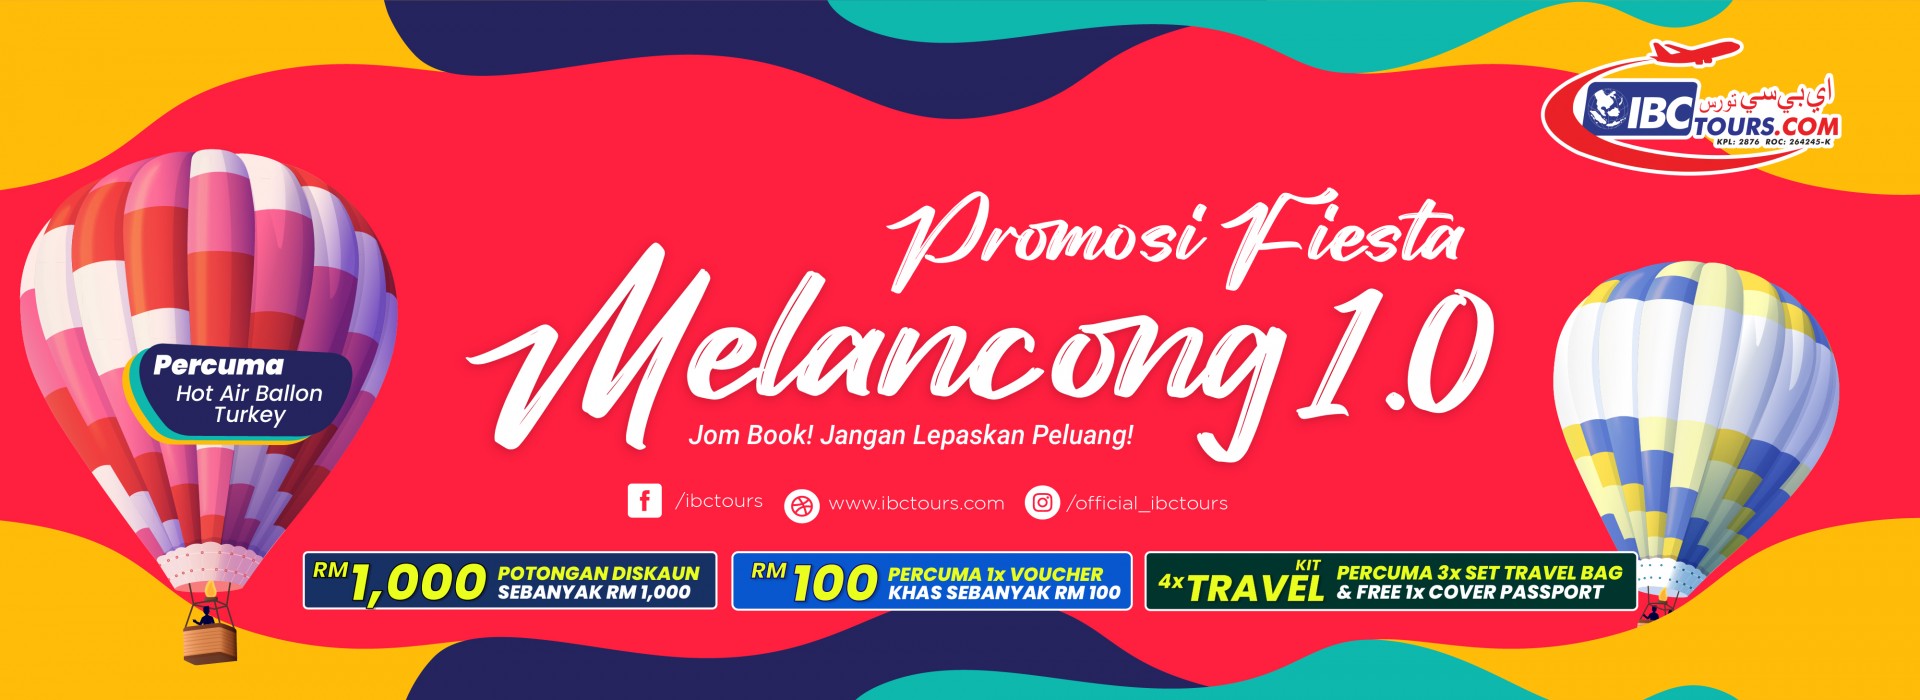 Promosi Banner Home Page